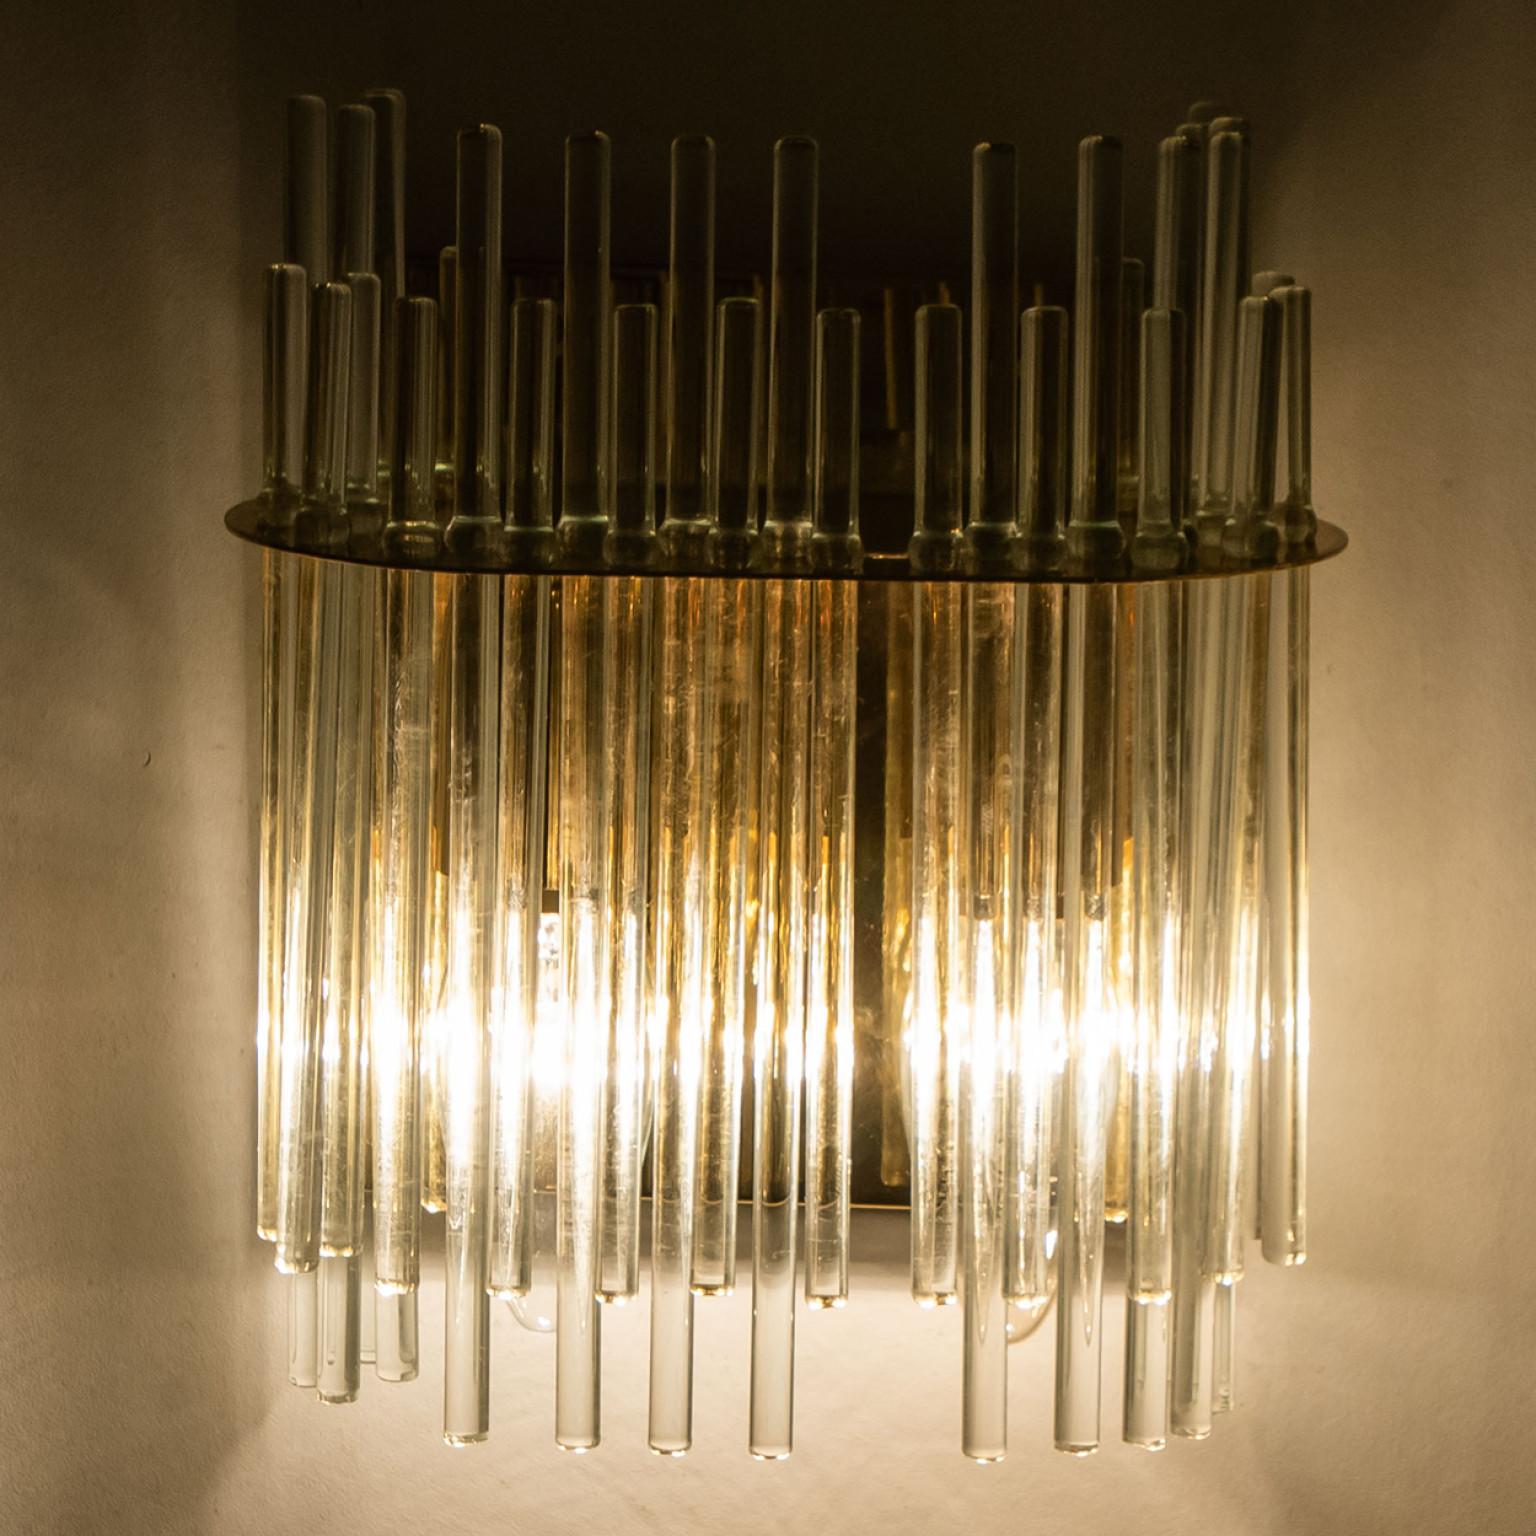 Wonderful high-end wall sconces in the style of Sciolari. With long glass 'tubes' and brass details giving each piece an elegant appearance which refracts the light, filling a room with a soft, warm glow.
The wall sconce has a brass back